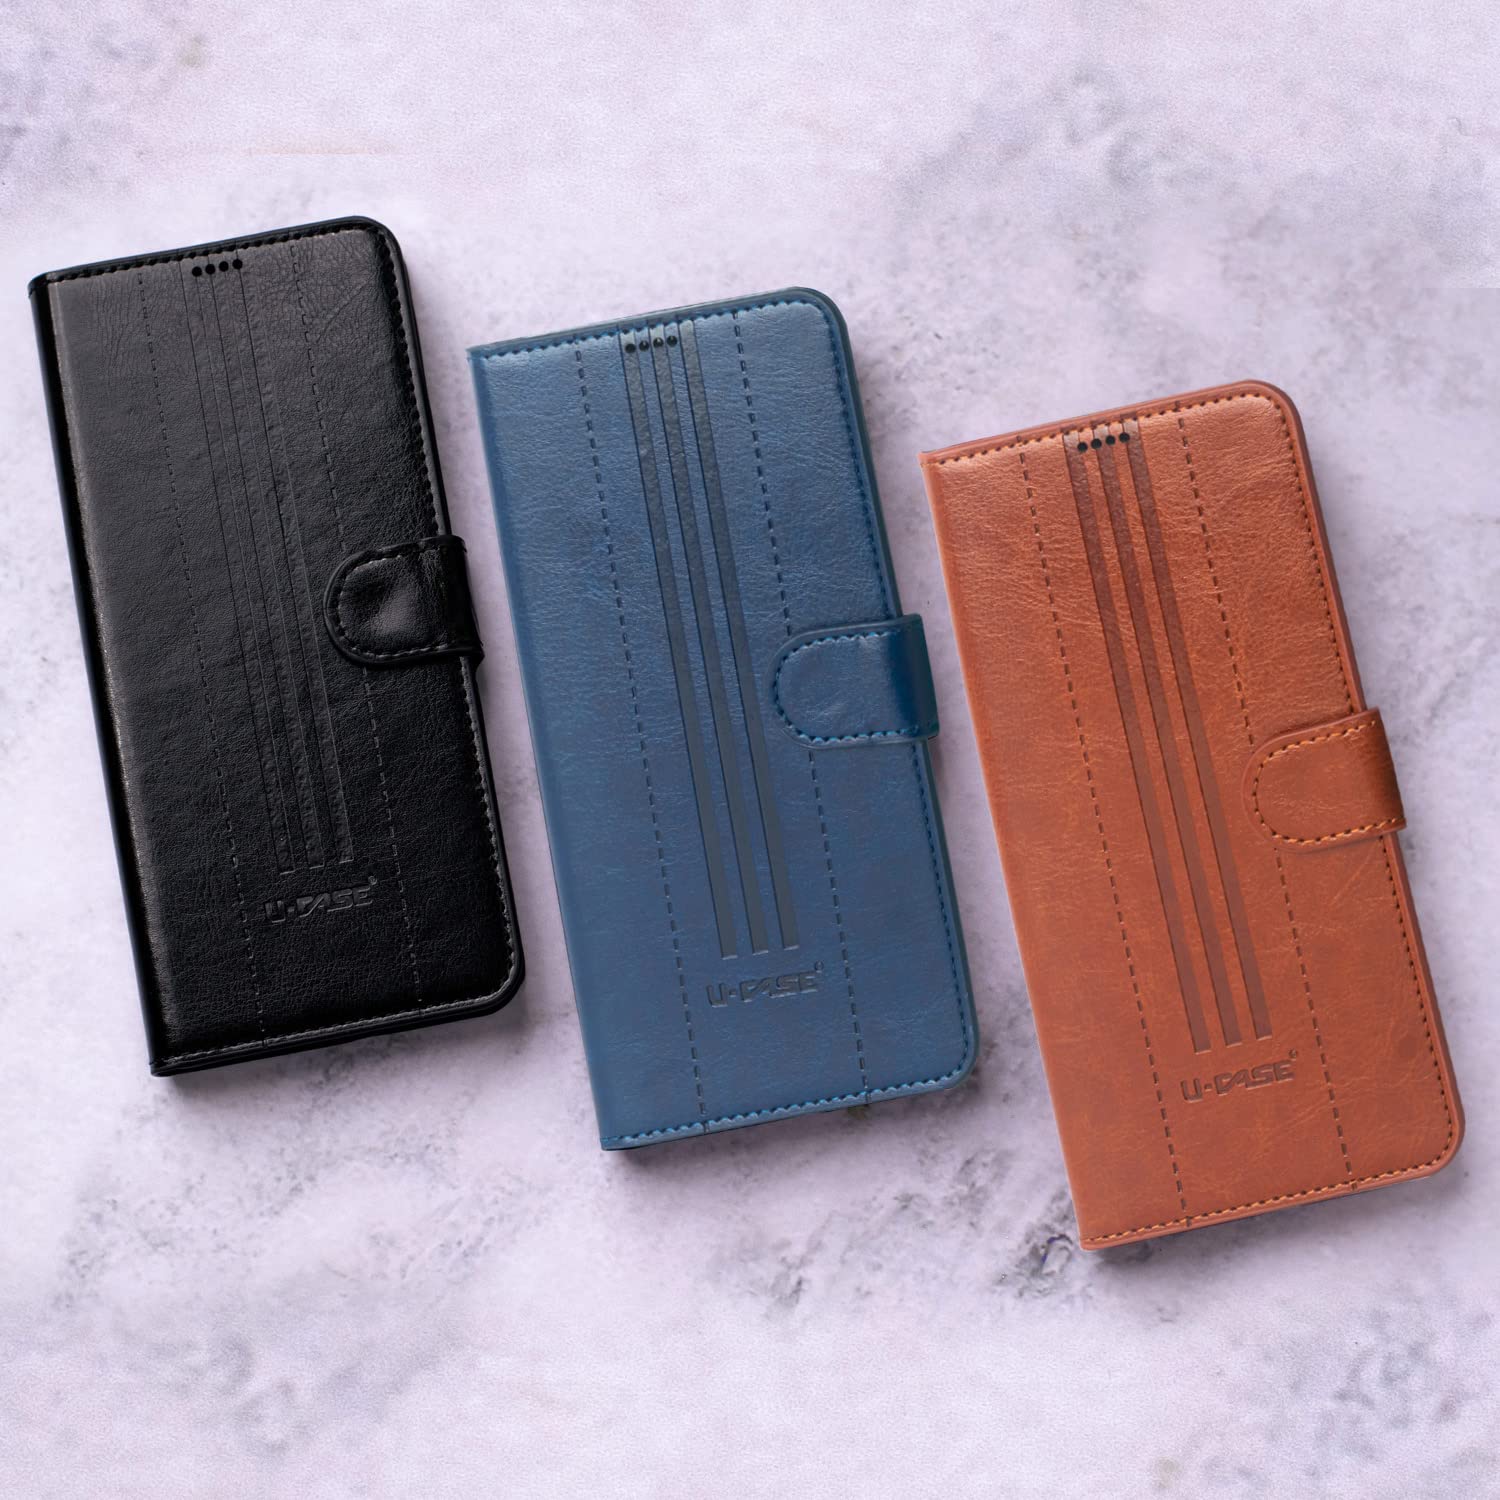 Shop U-CASE Flip Cover for Oppo A15s / Oppo A15 Vegan Foldable Stand & Pocket Magnetic Closure colors